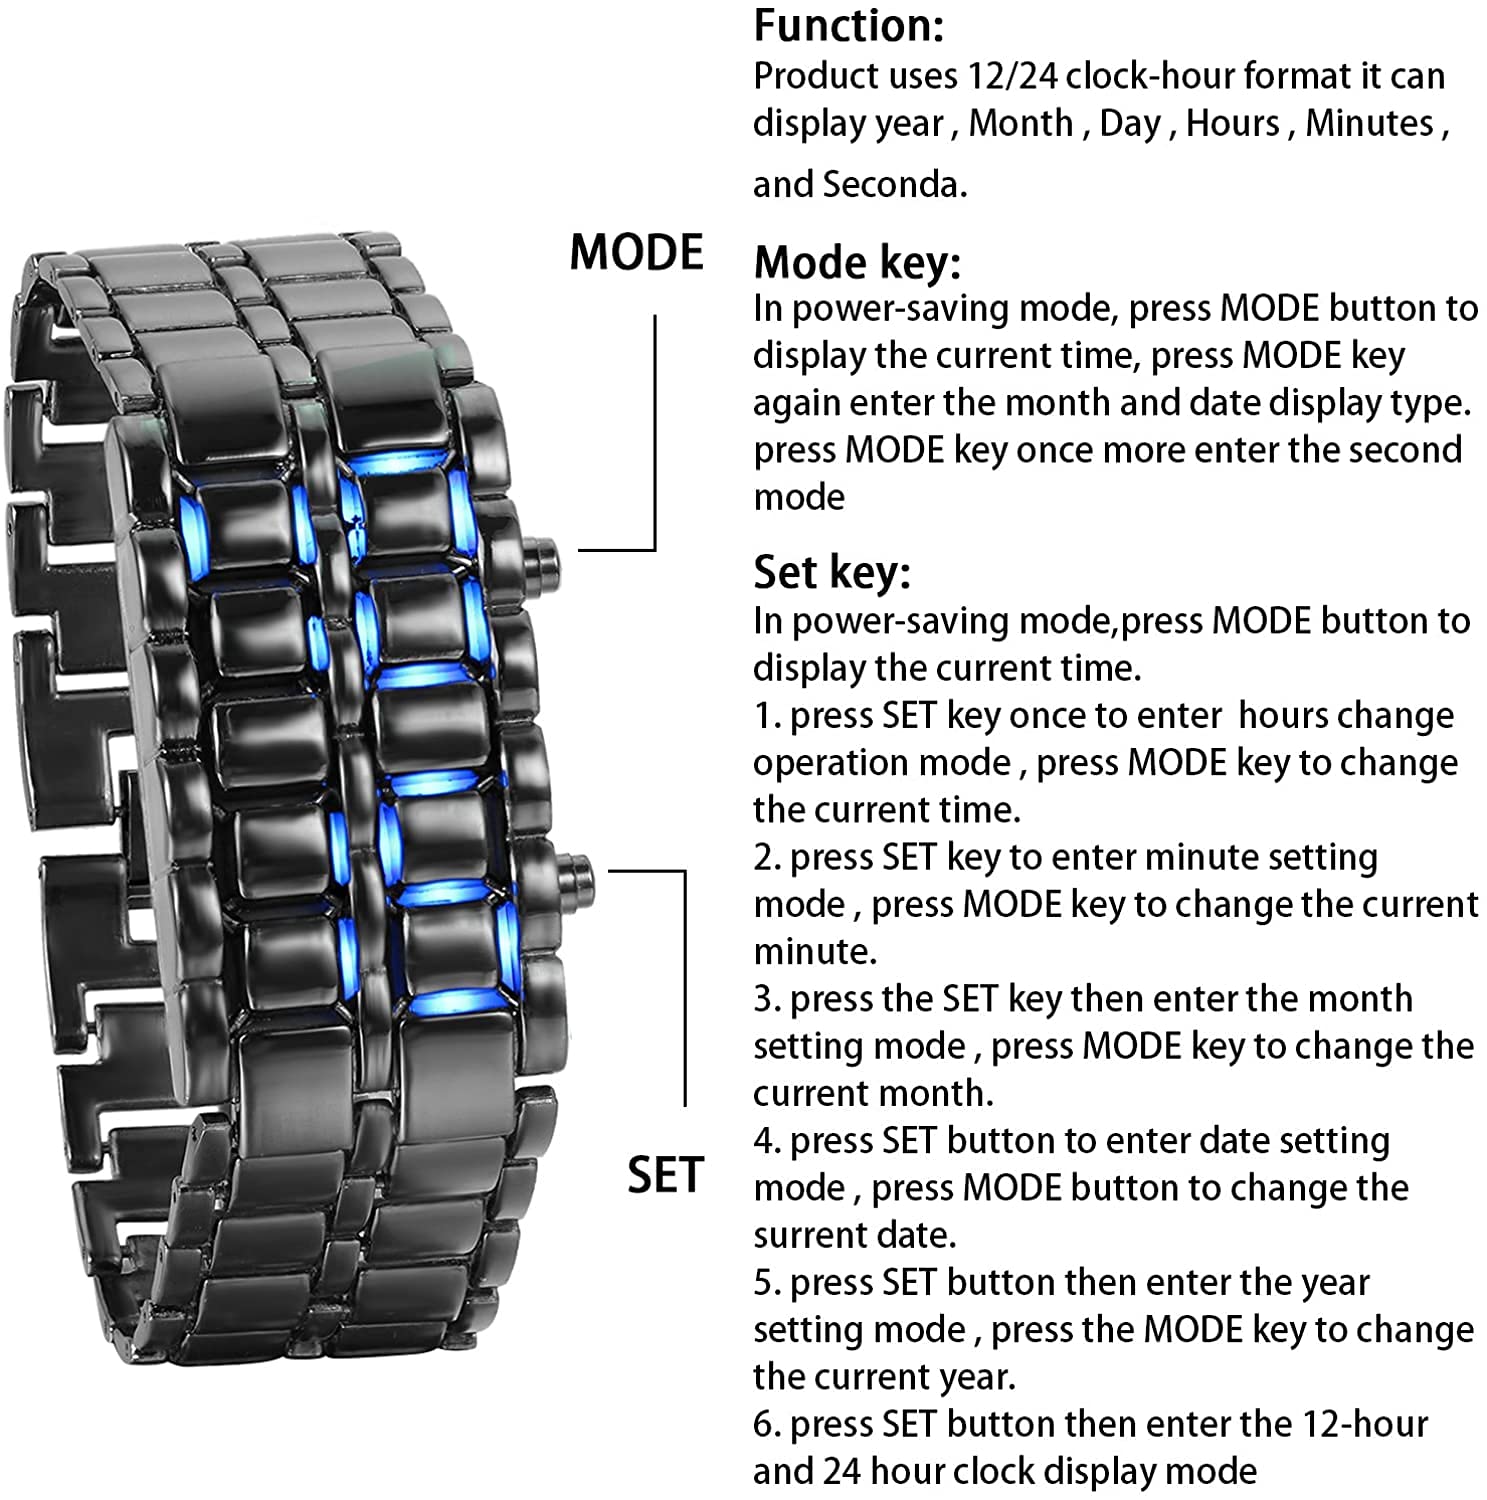 BESTKANG Luxury Men’s and Women's Stainless Steel Bracelet Watches Blue LED Lamp Black Volcanic Lava Style Fashion Casual Sports Watch